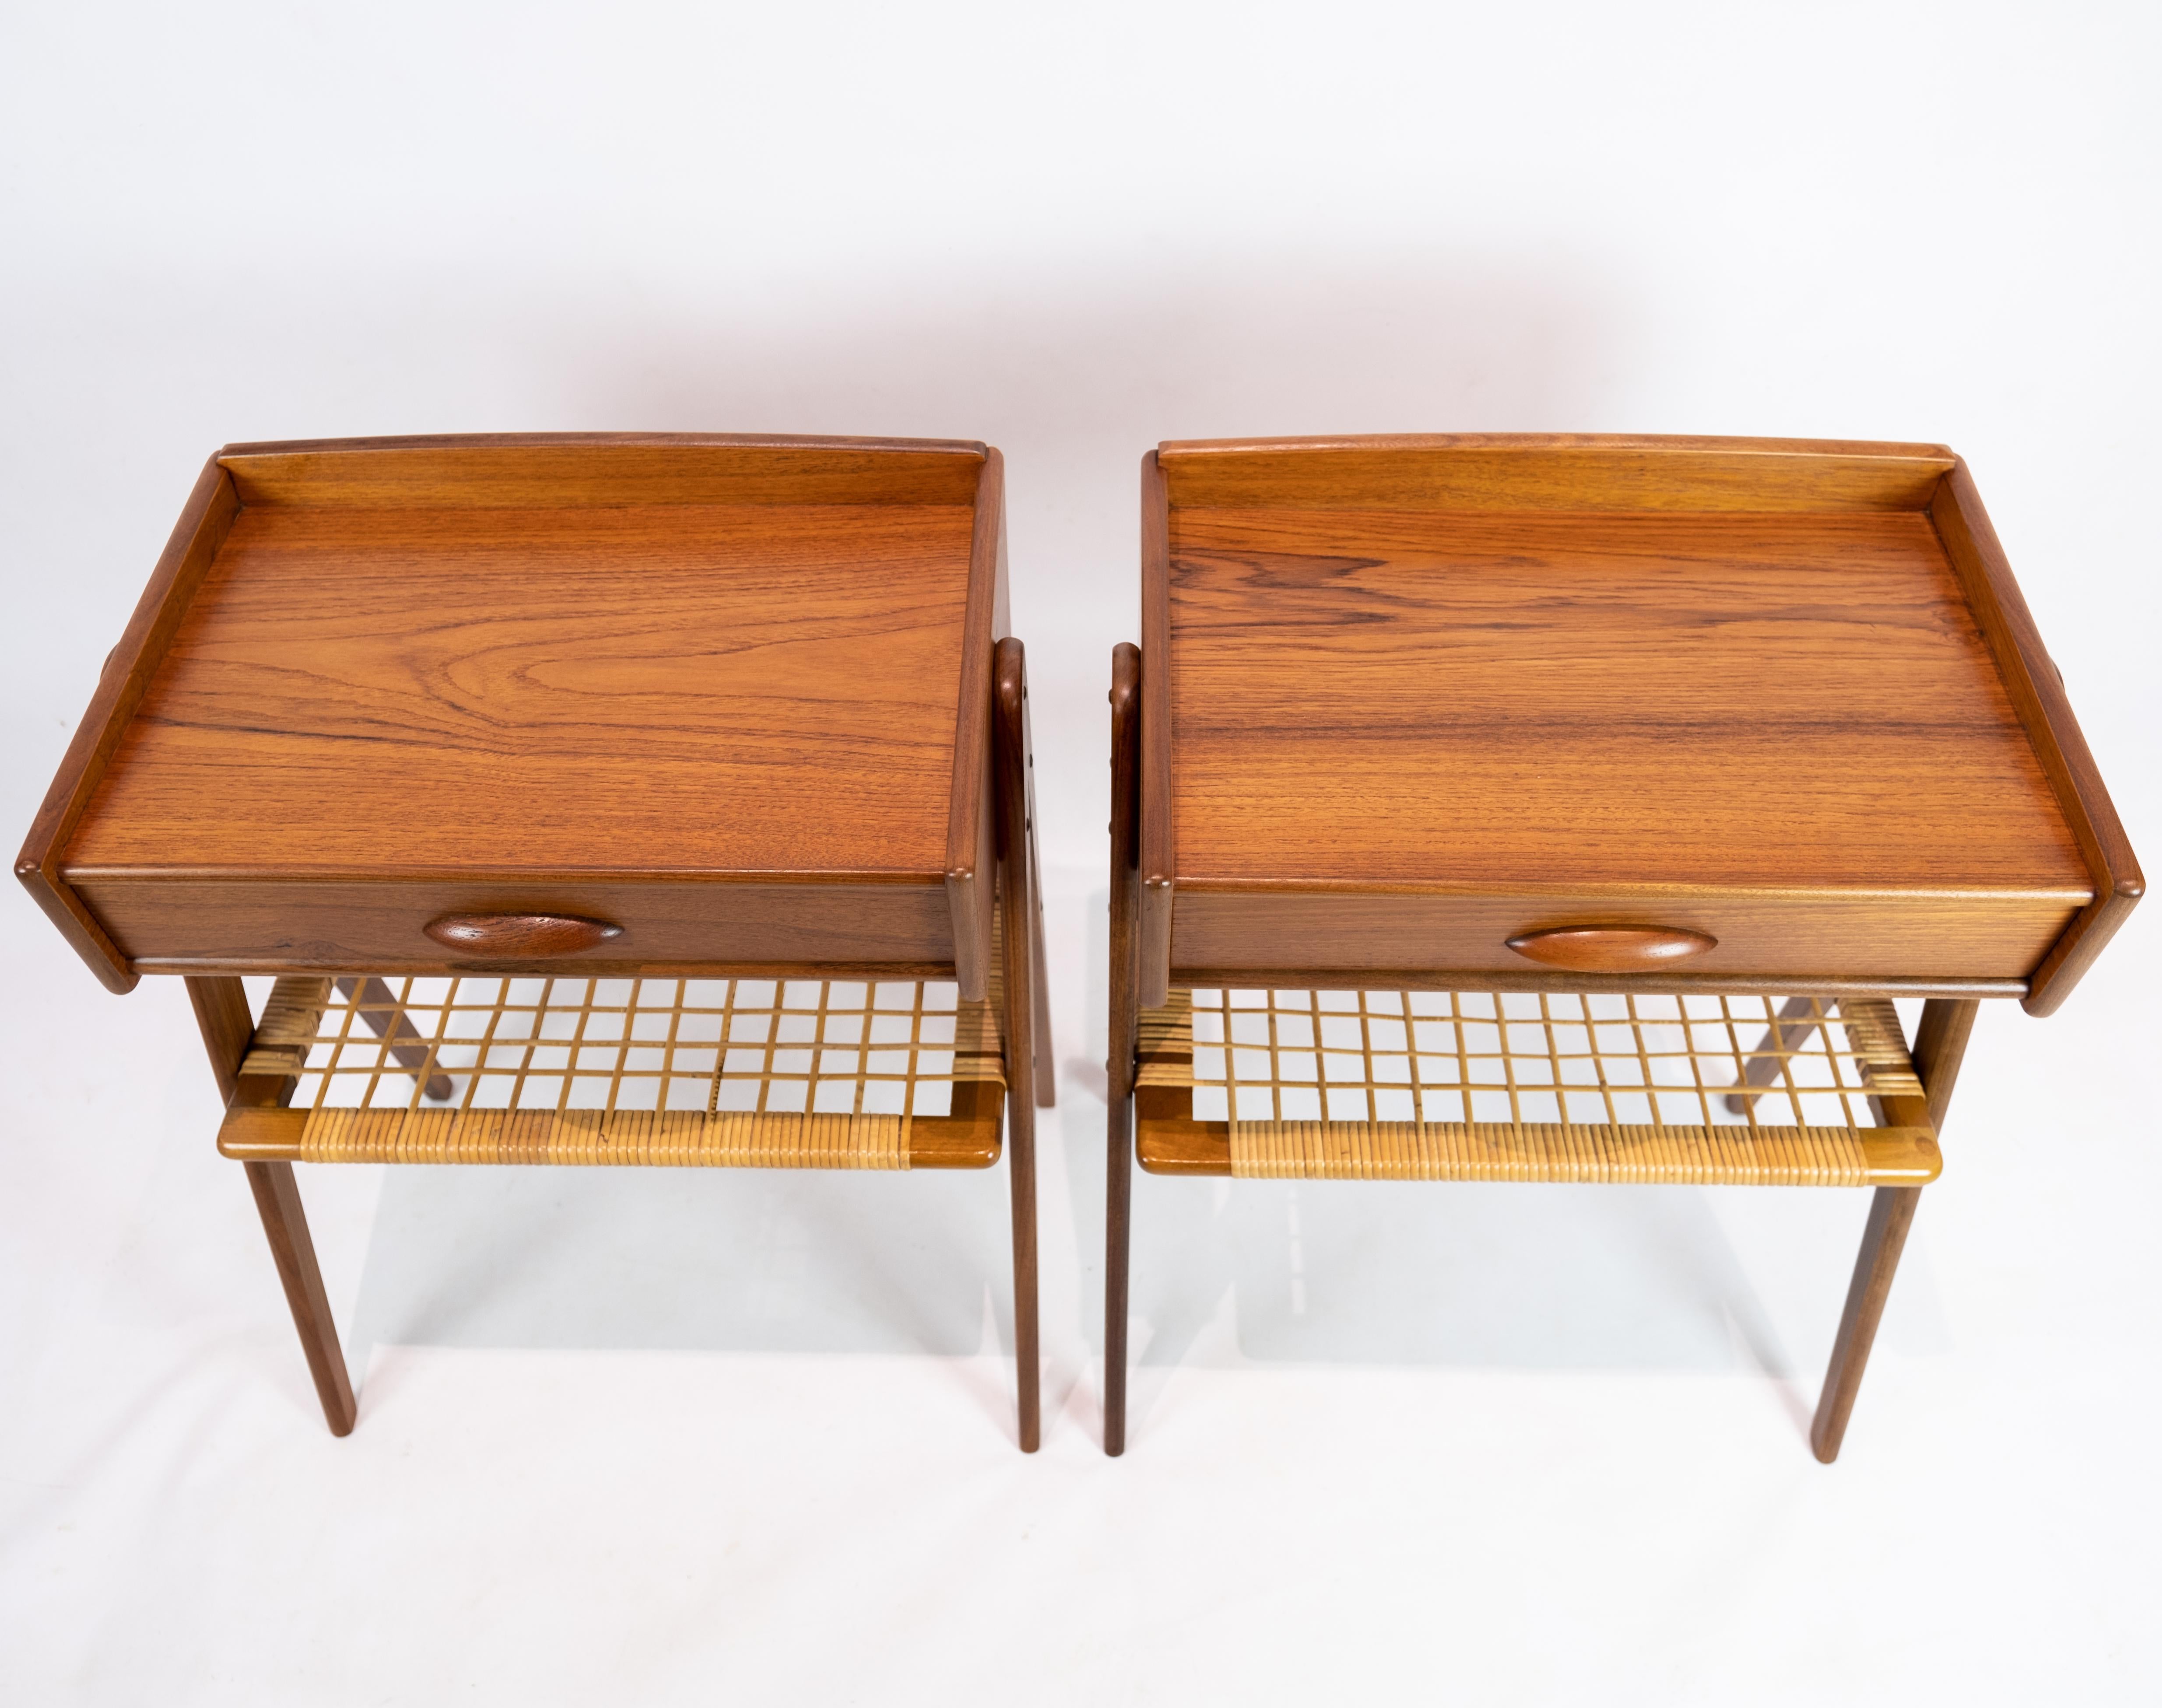 A pair of side tables in teak with paper cord shelf of Danish design from the 1960s. The tables are in great vintage condition.